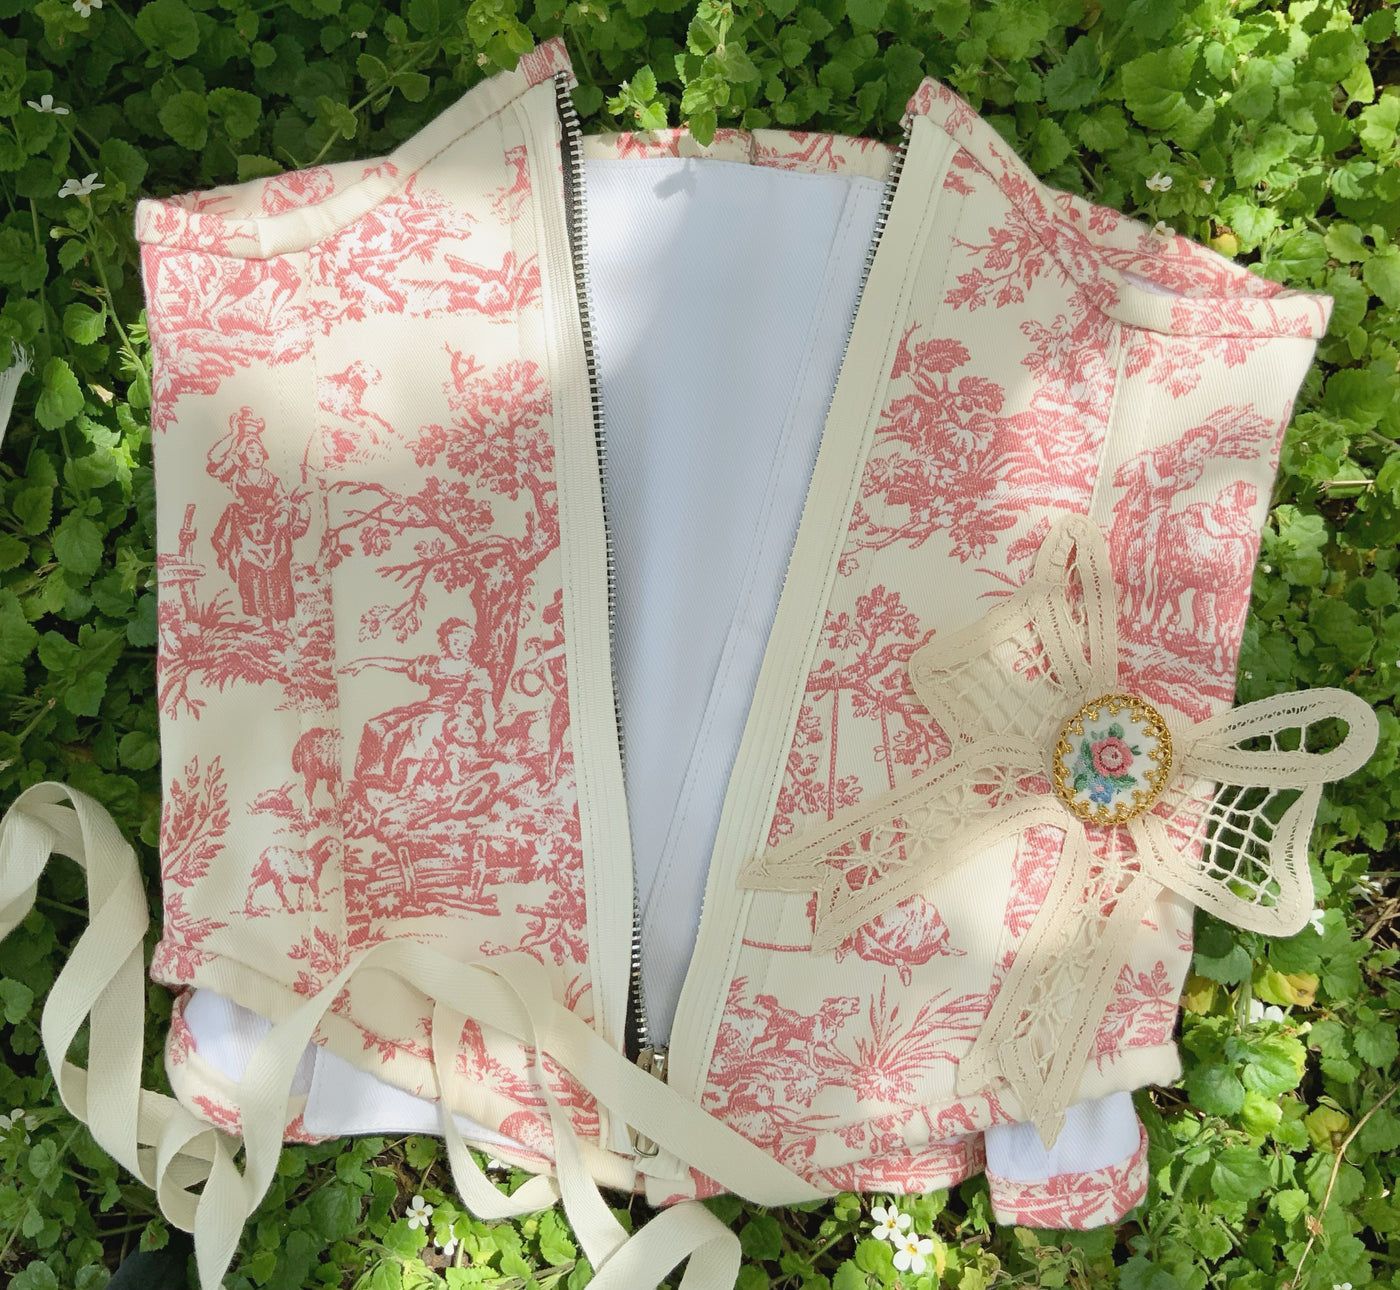 Toile de Jouy with vintage pin underbust